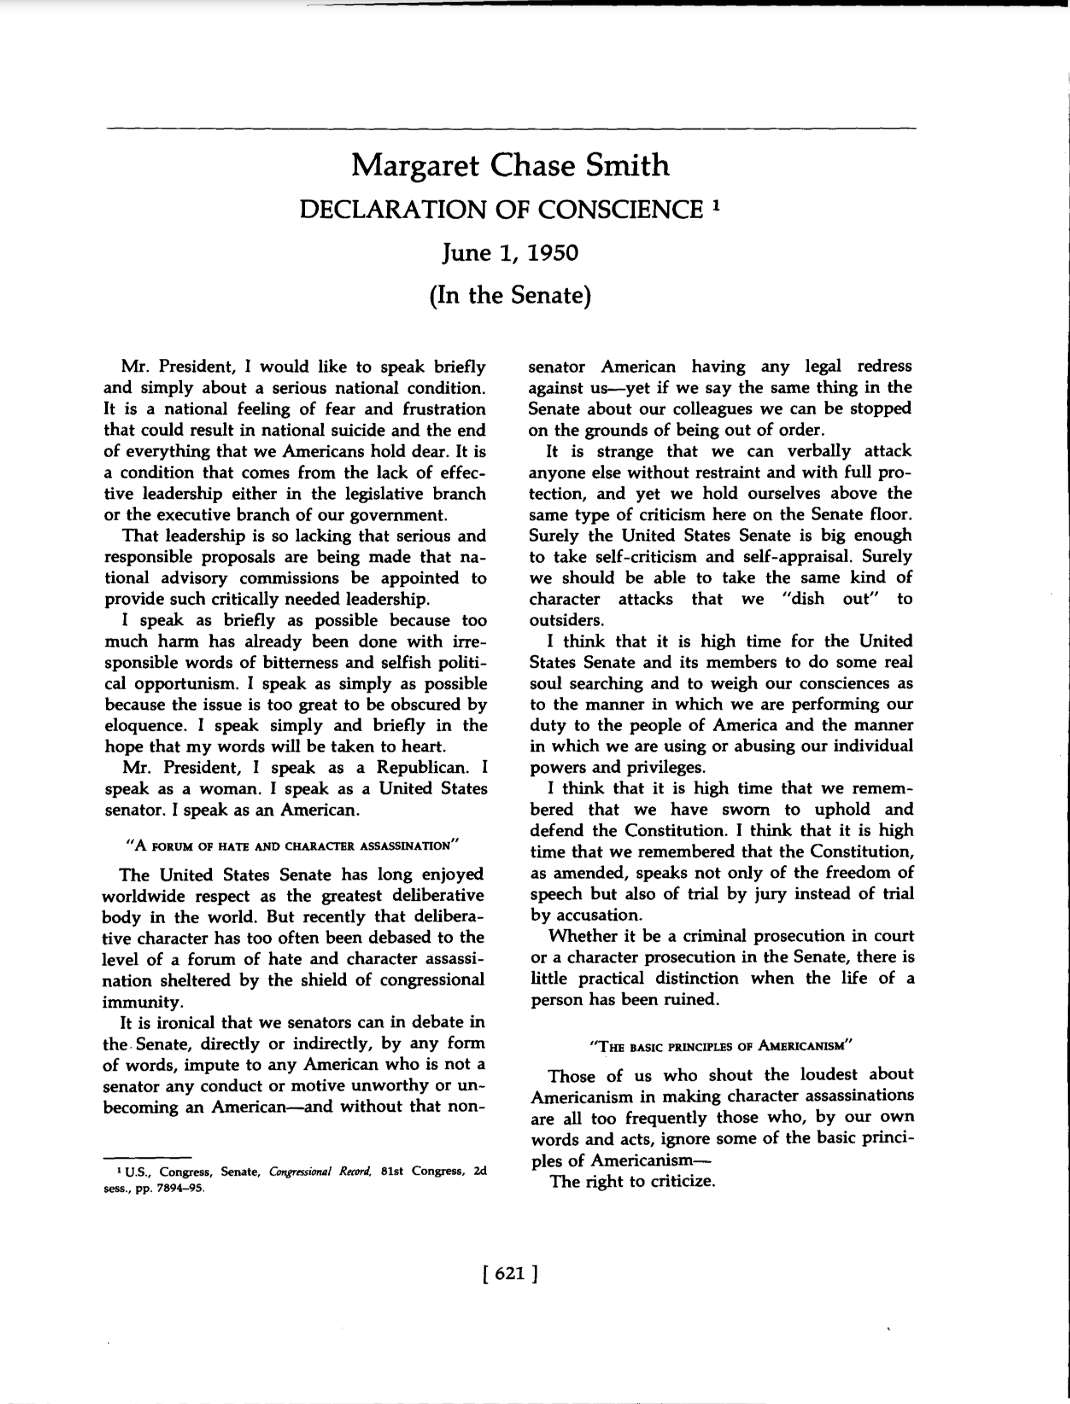 First page of Margaret Chase Smith's Declaration of Conscience